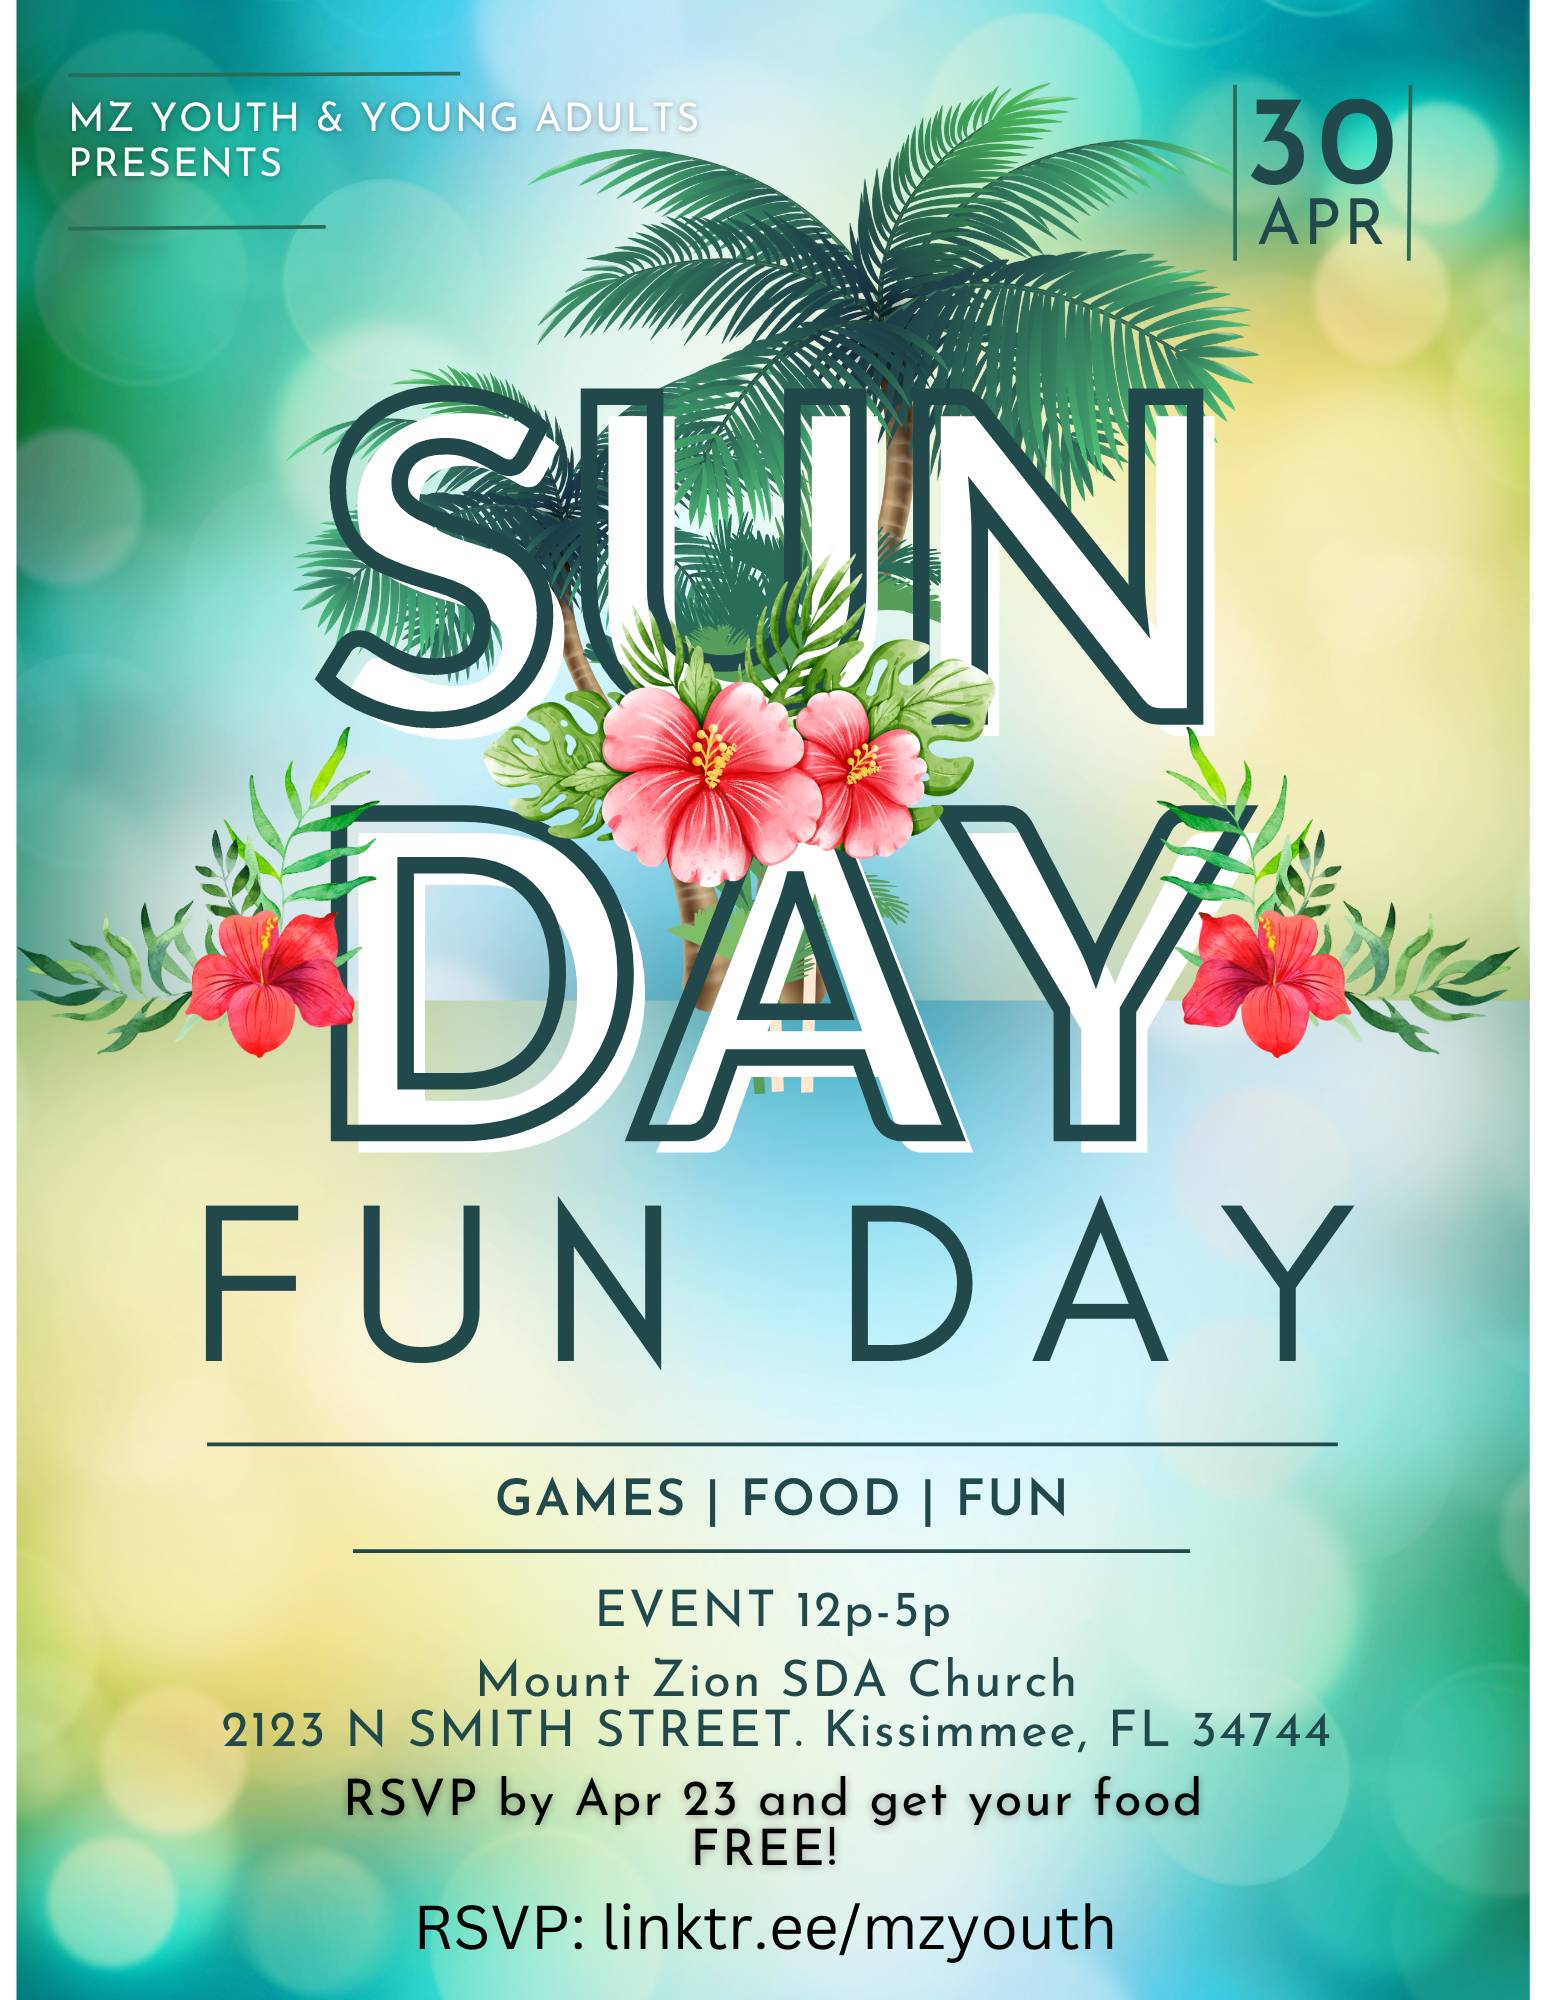 Advertisement for Sunday Fun Day at Mt Zion SDA Church